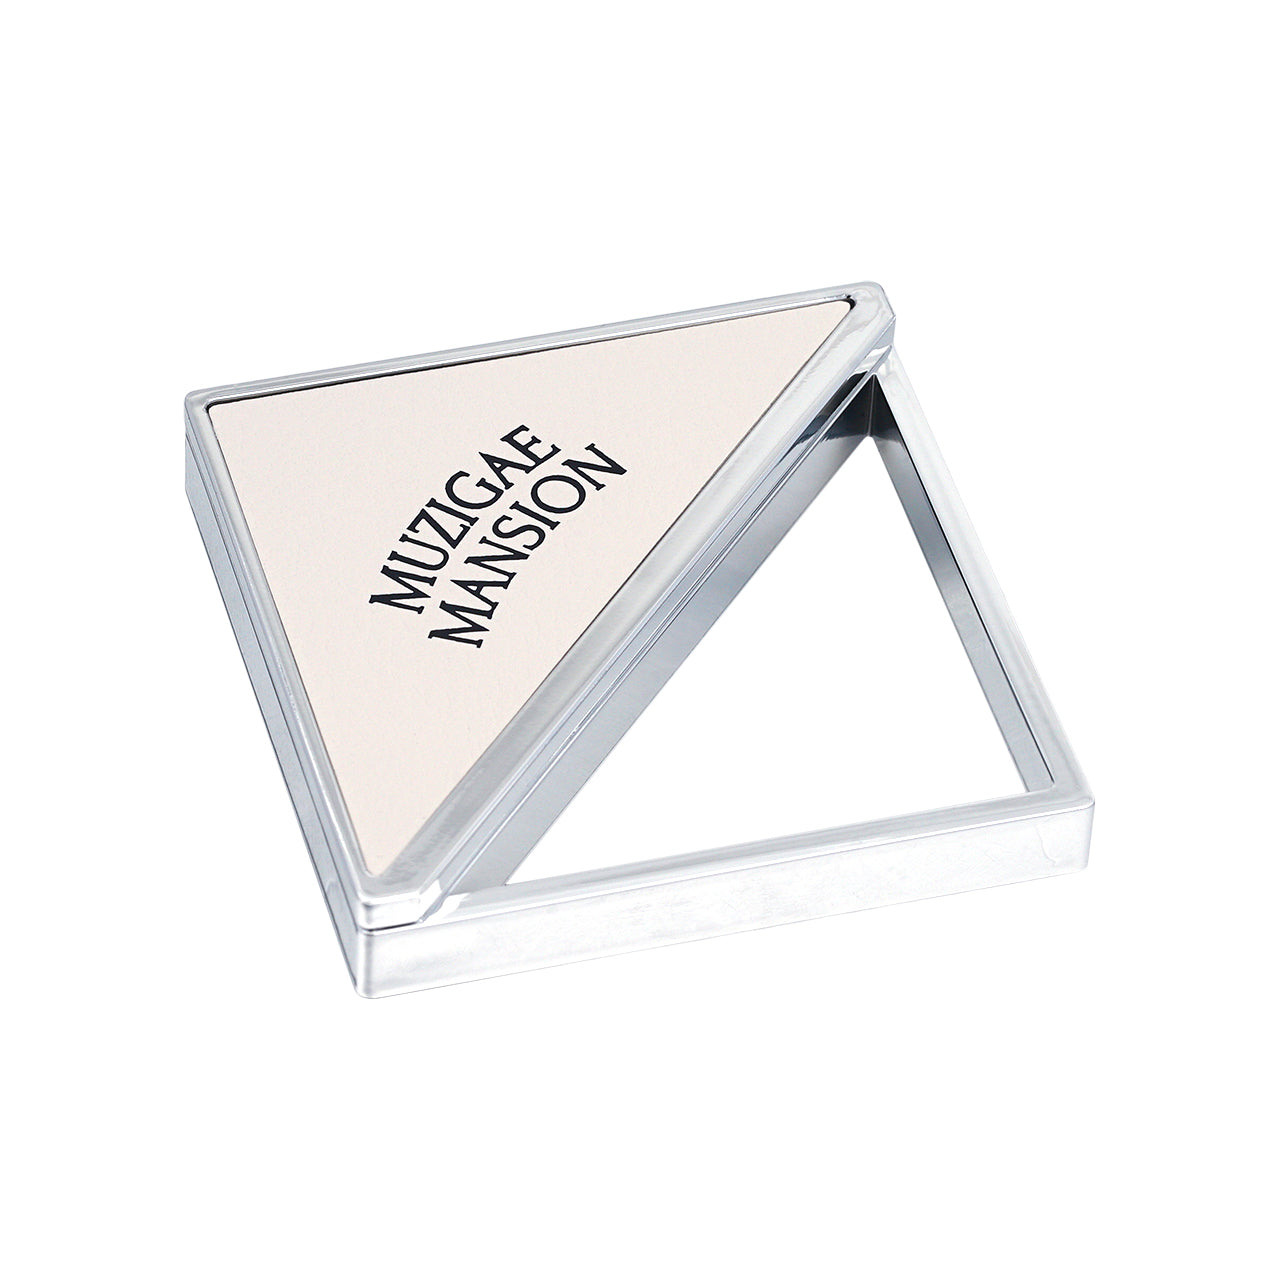 Muzigae Mansion Fitting Highlighter (# Fabluous) 4.5g